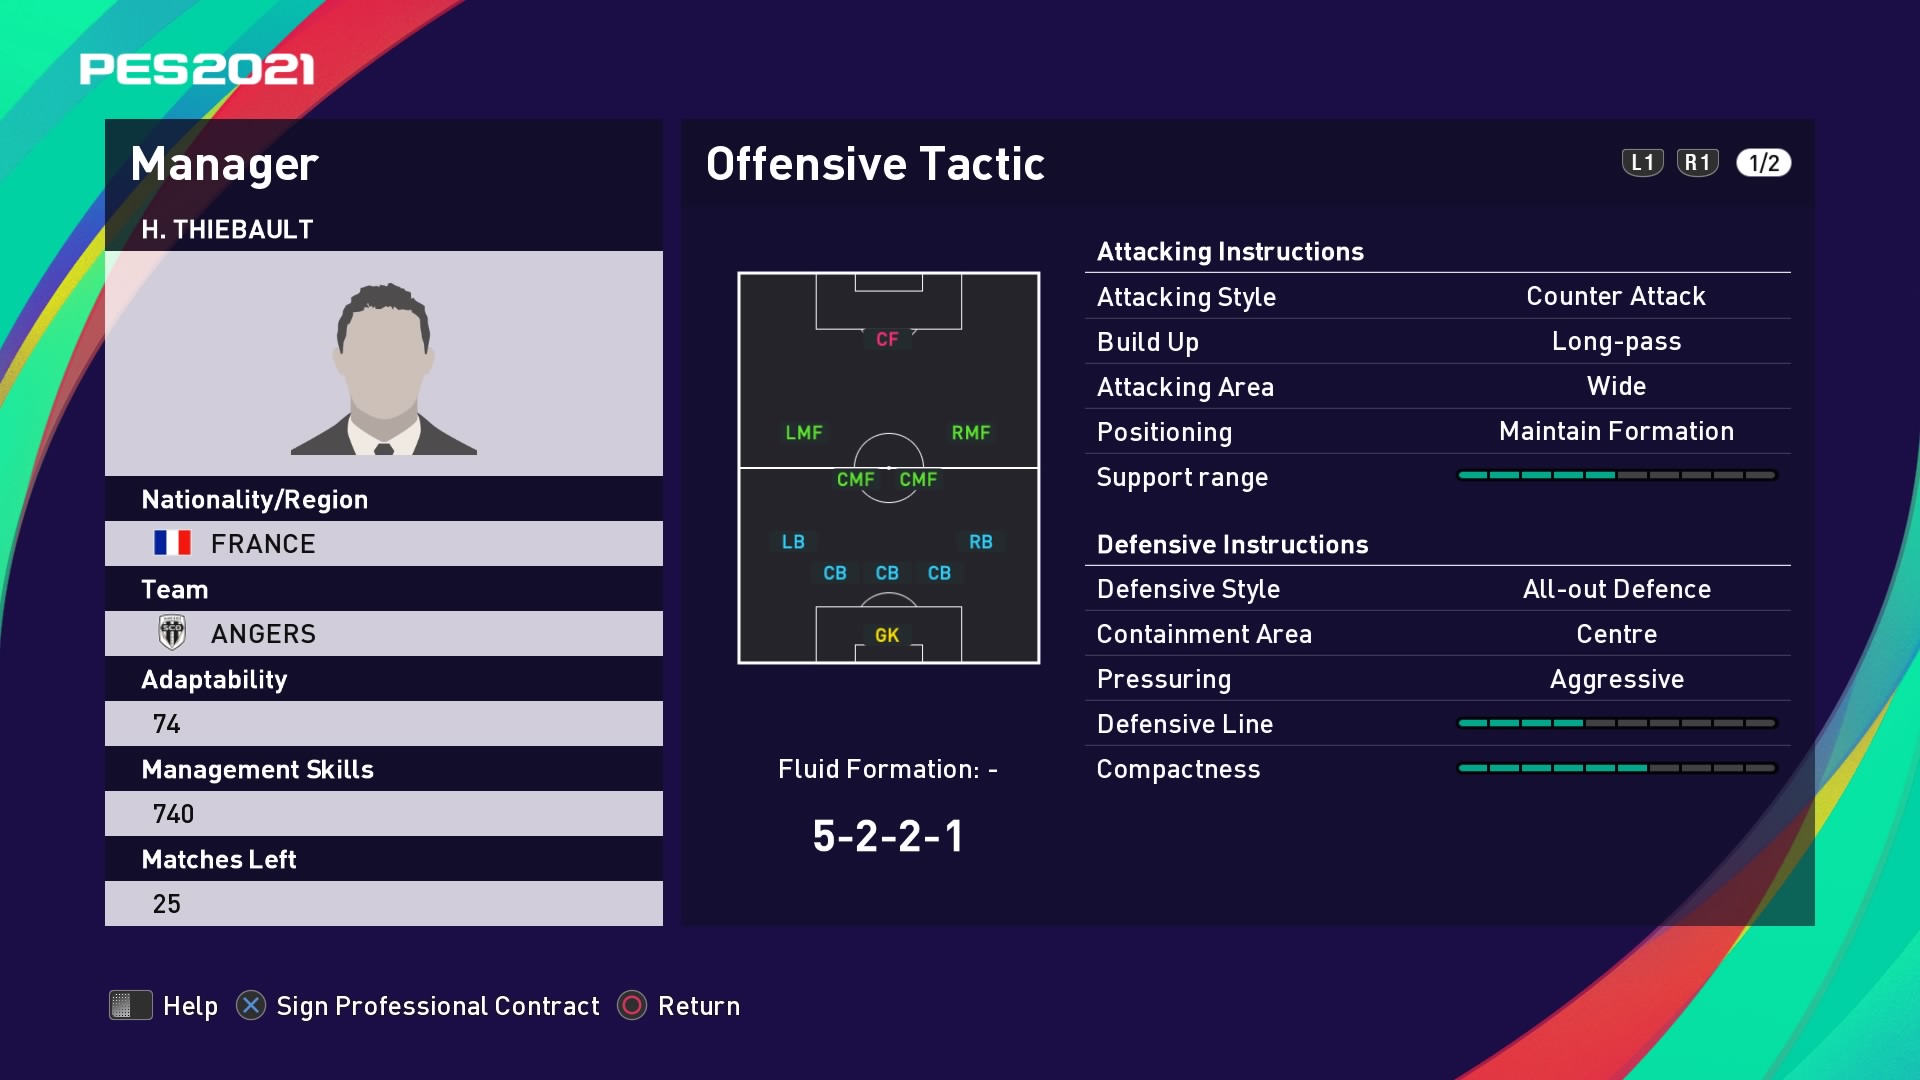 H. Thiebault (Stéphane Moulin ) Offensive Tactic in PES 2021 myClub